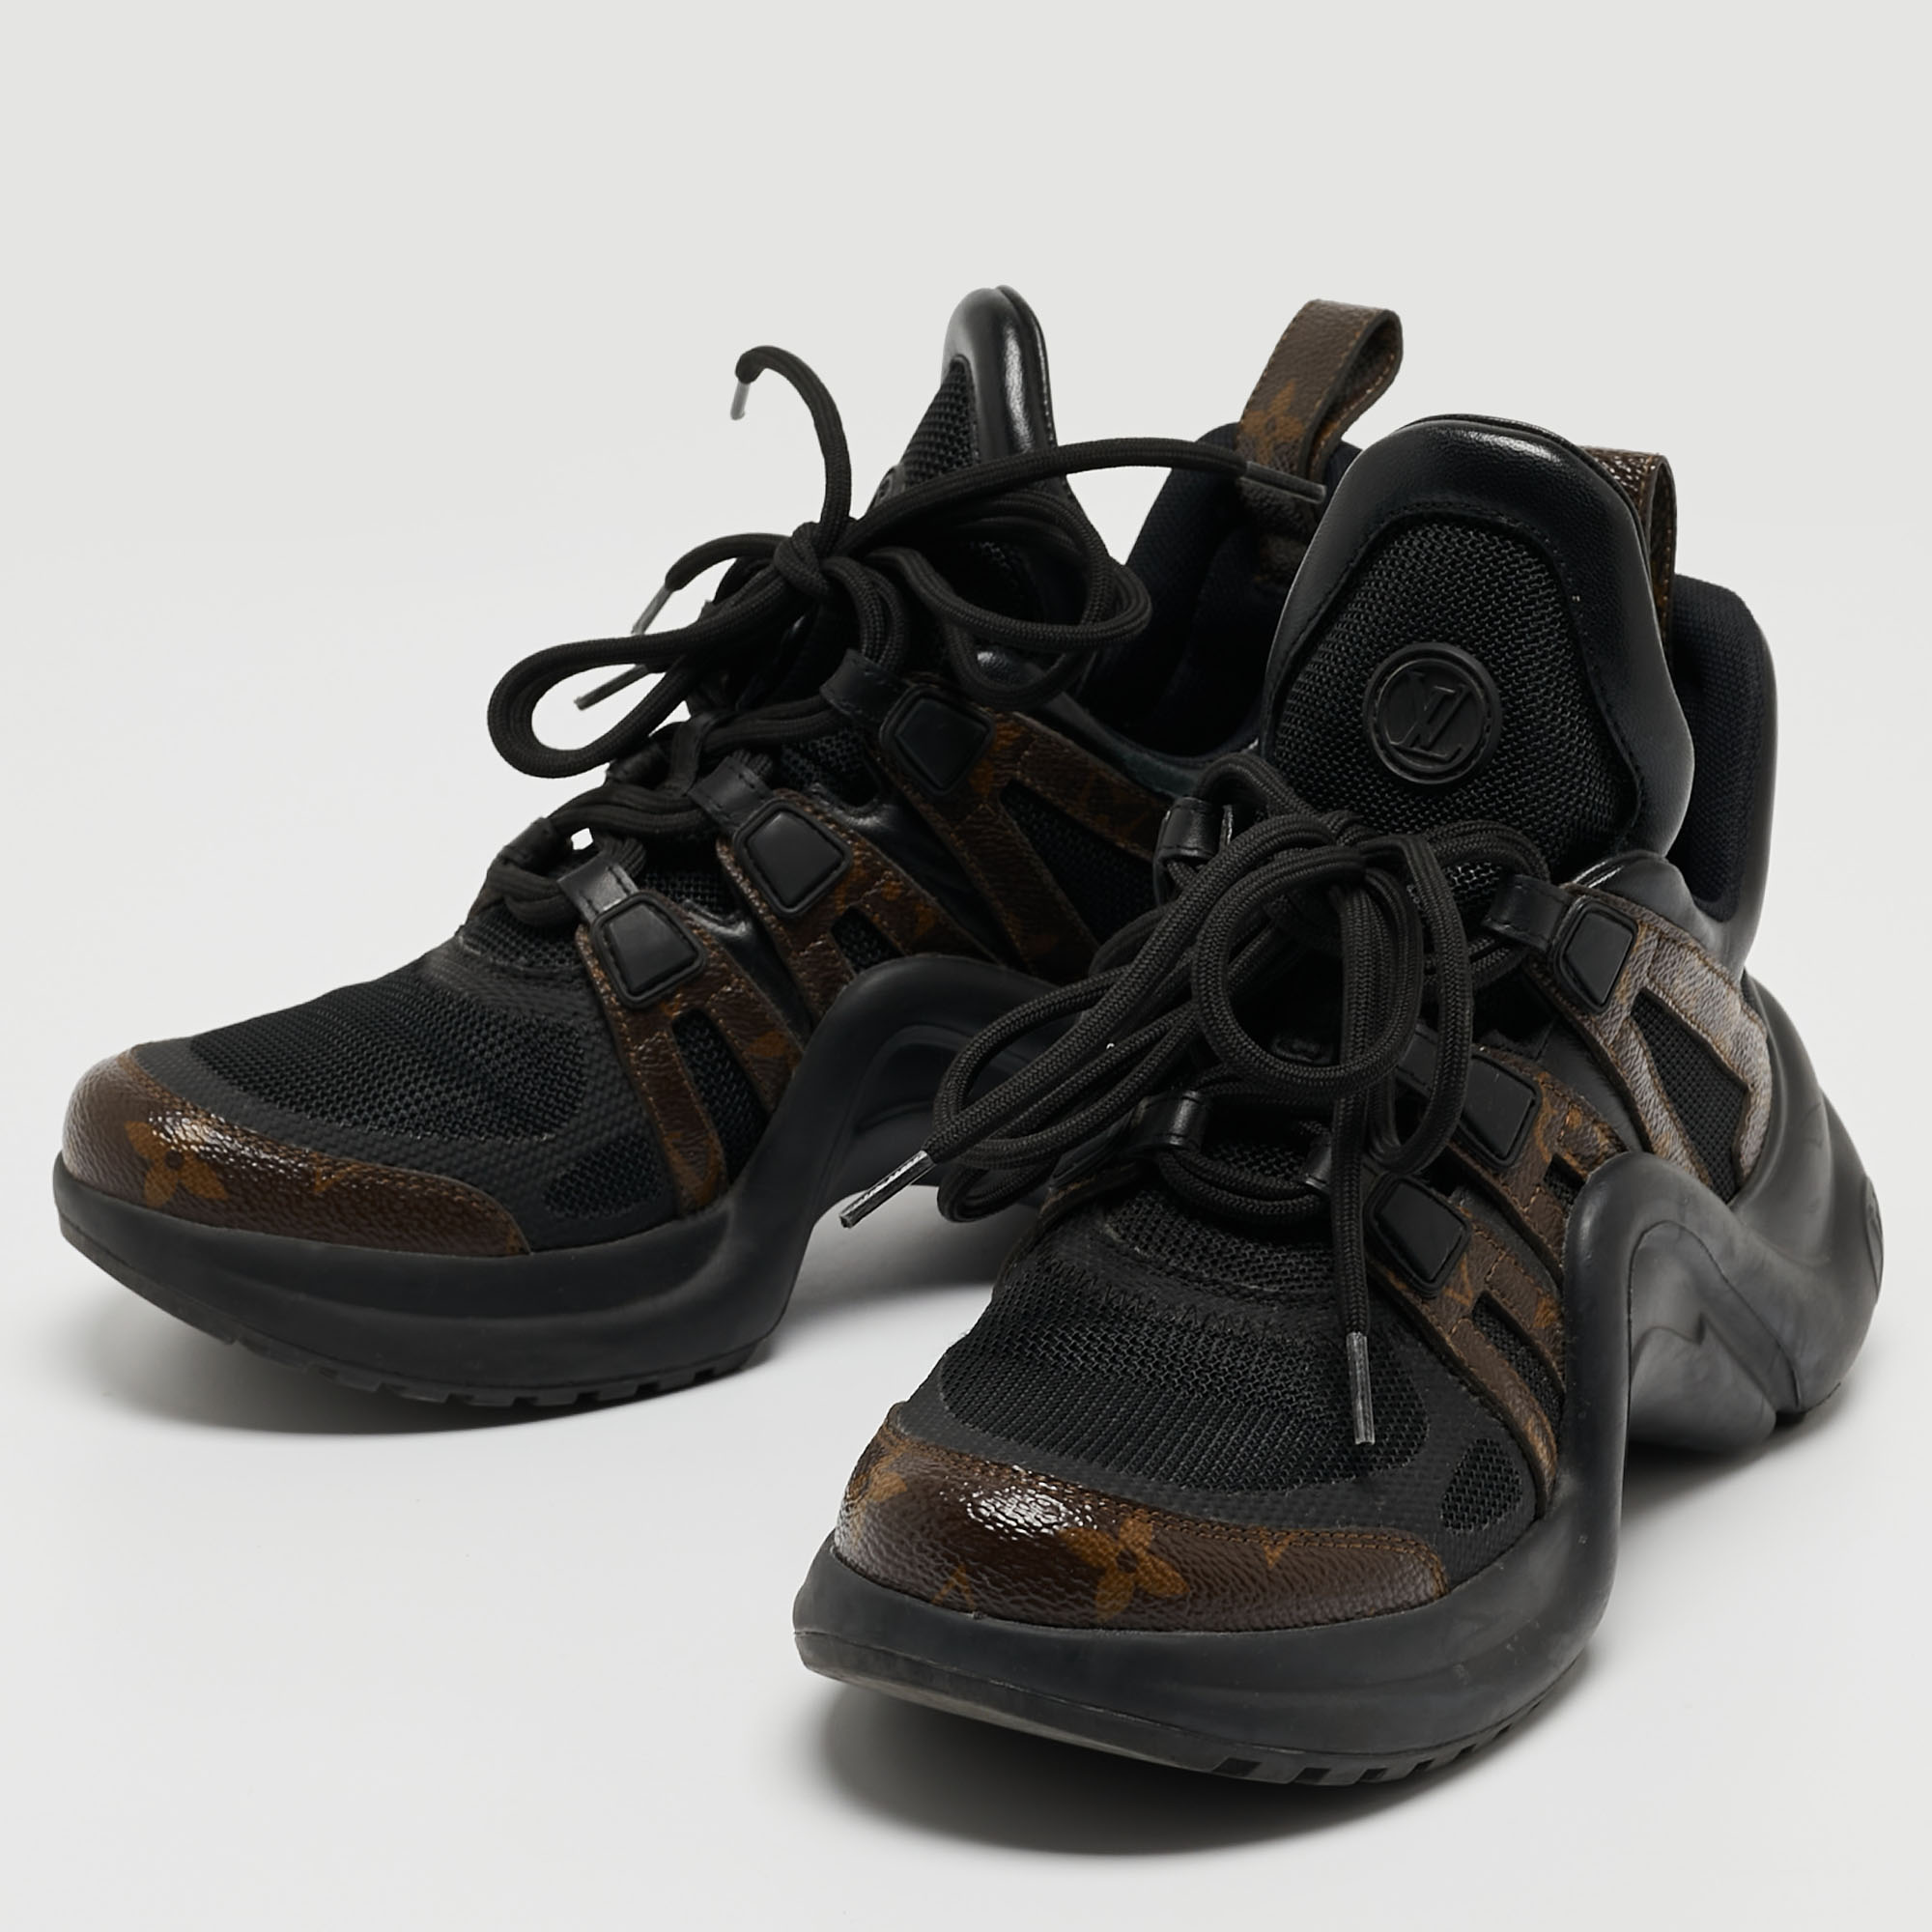 

Louis Vuitton Black/Brown Leather and Monogram Canvas Archlight Sneakers Size